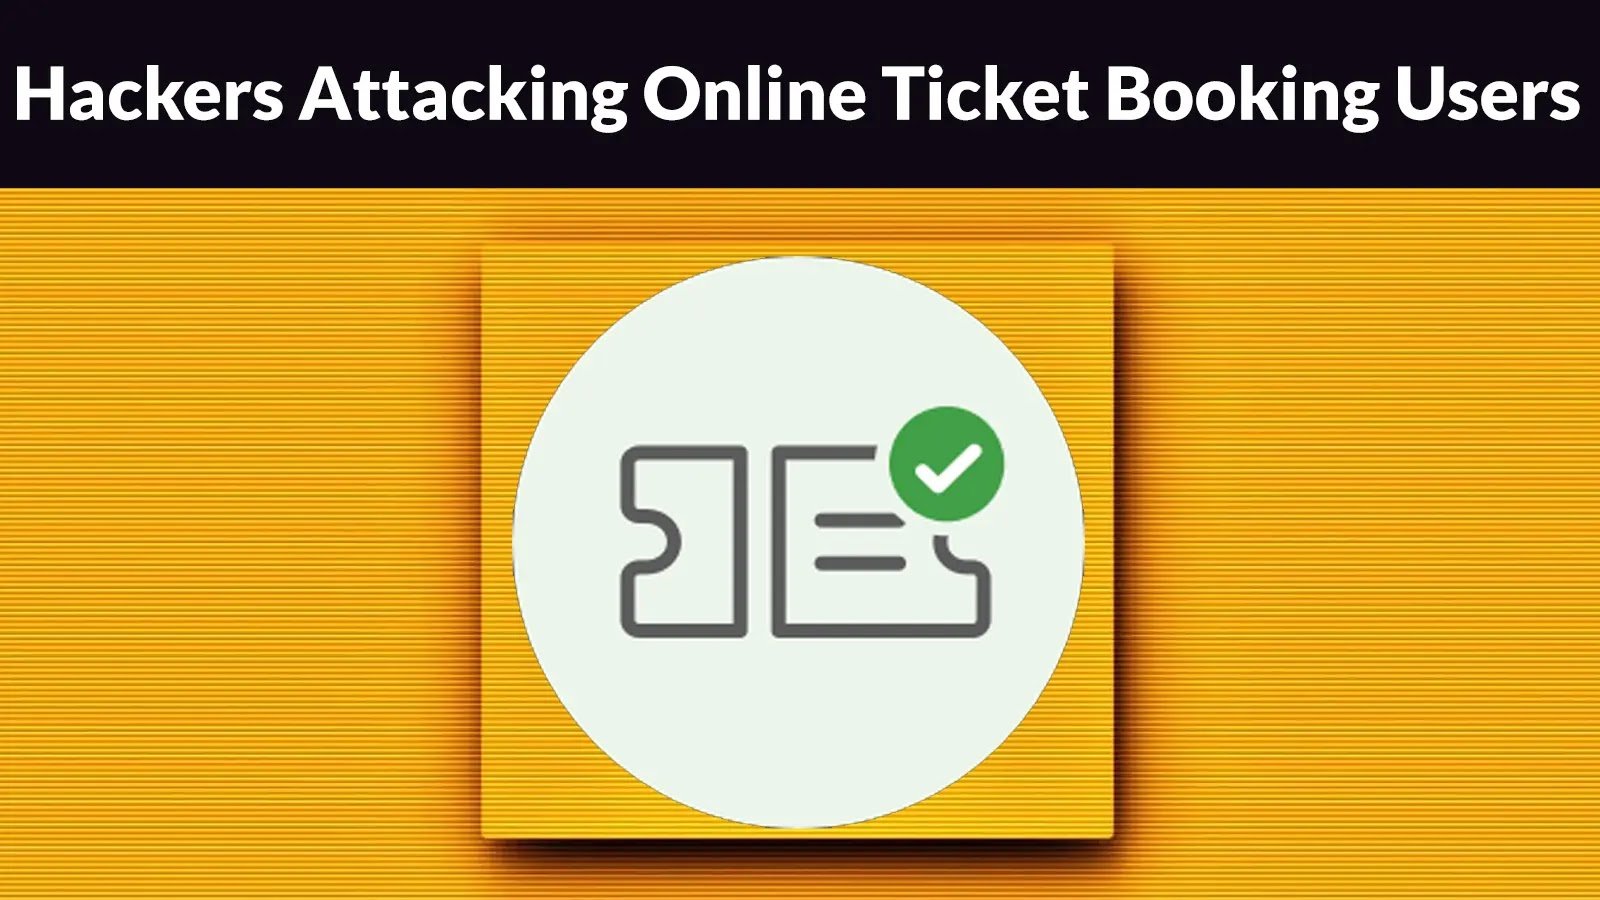 Hackers Attacking Online Ticket Booking Users Using Weaponized PDF Files